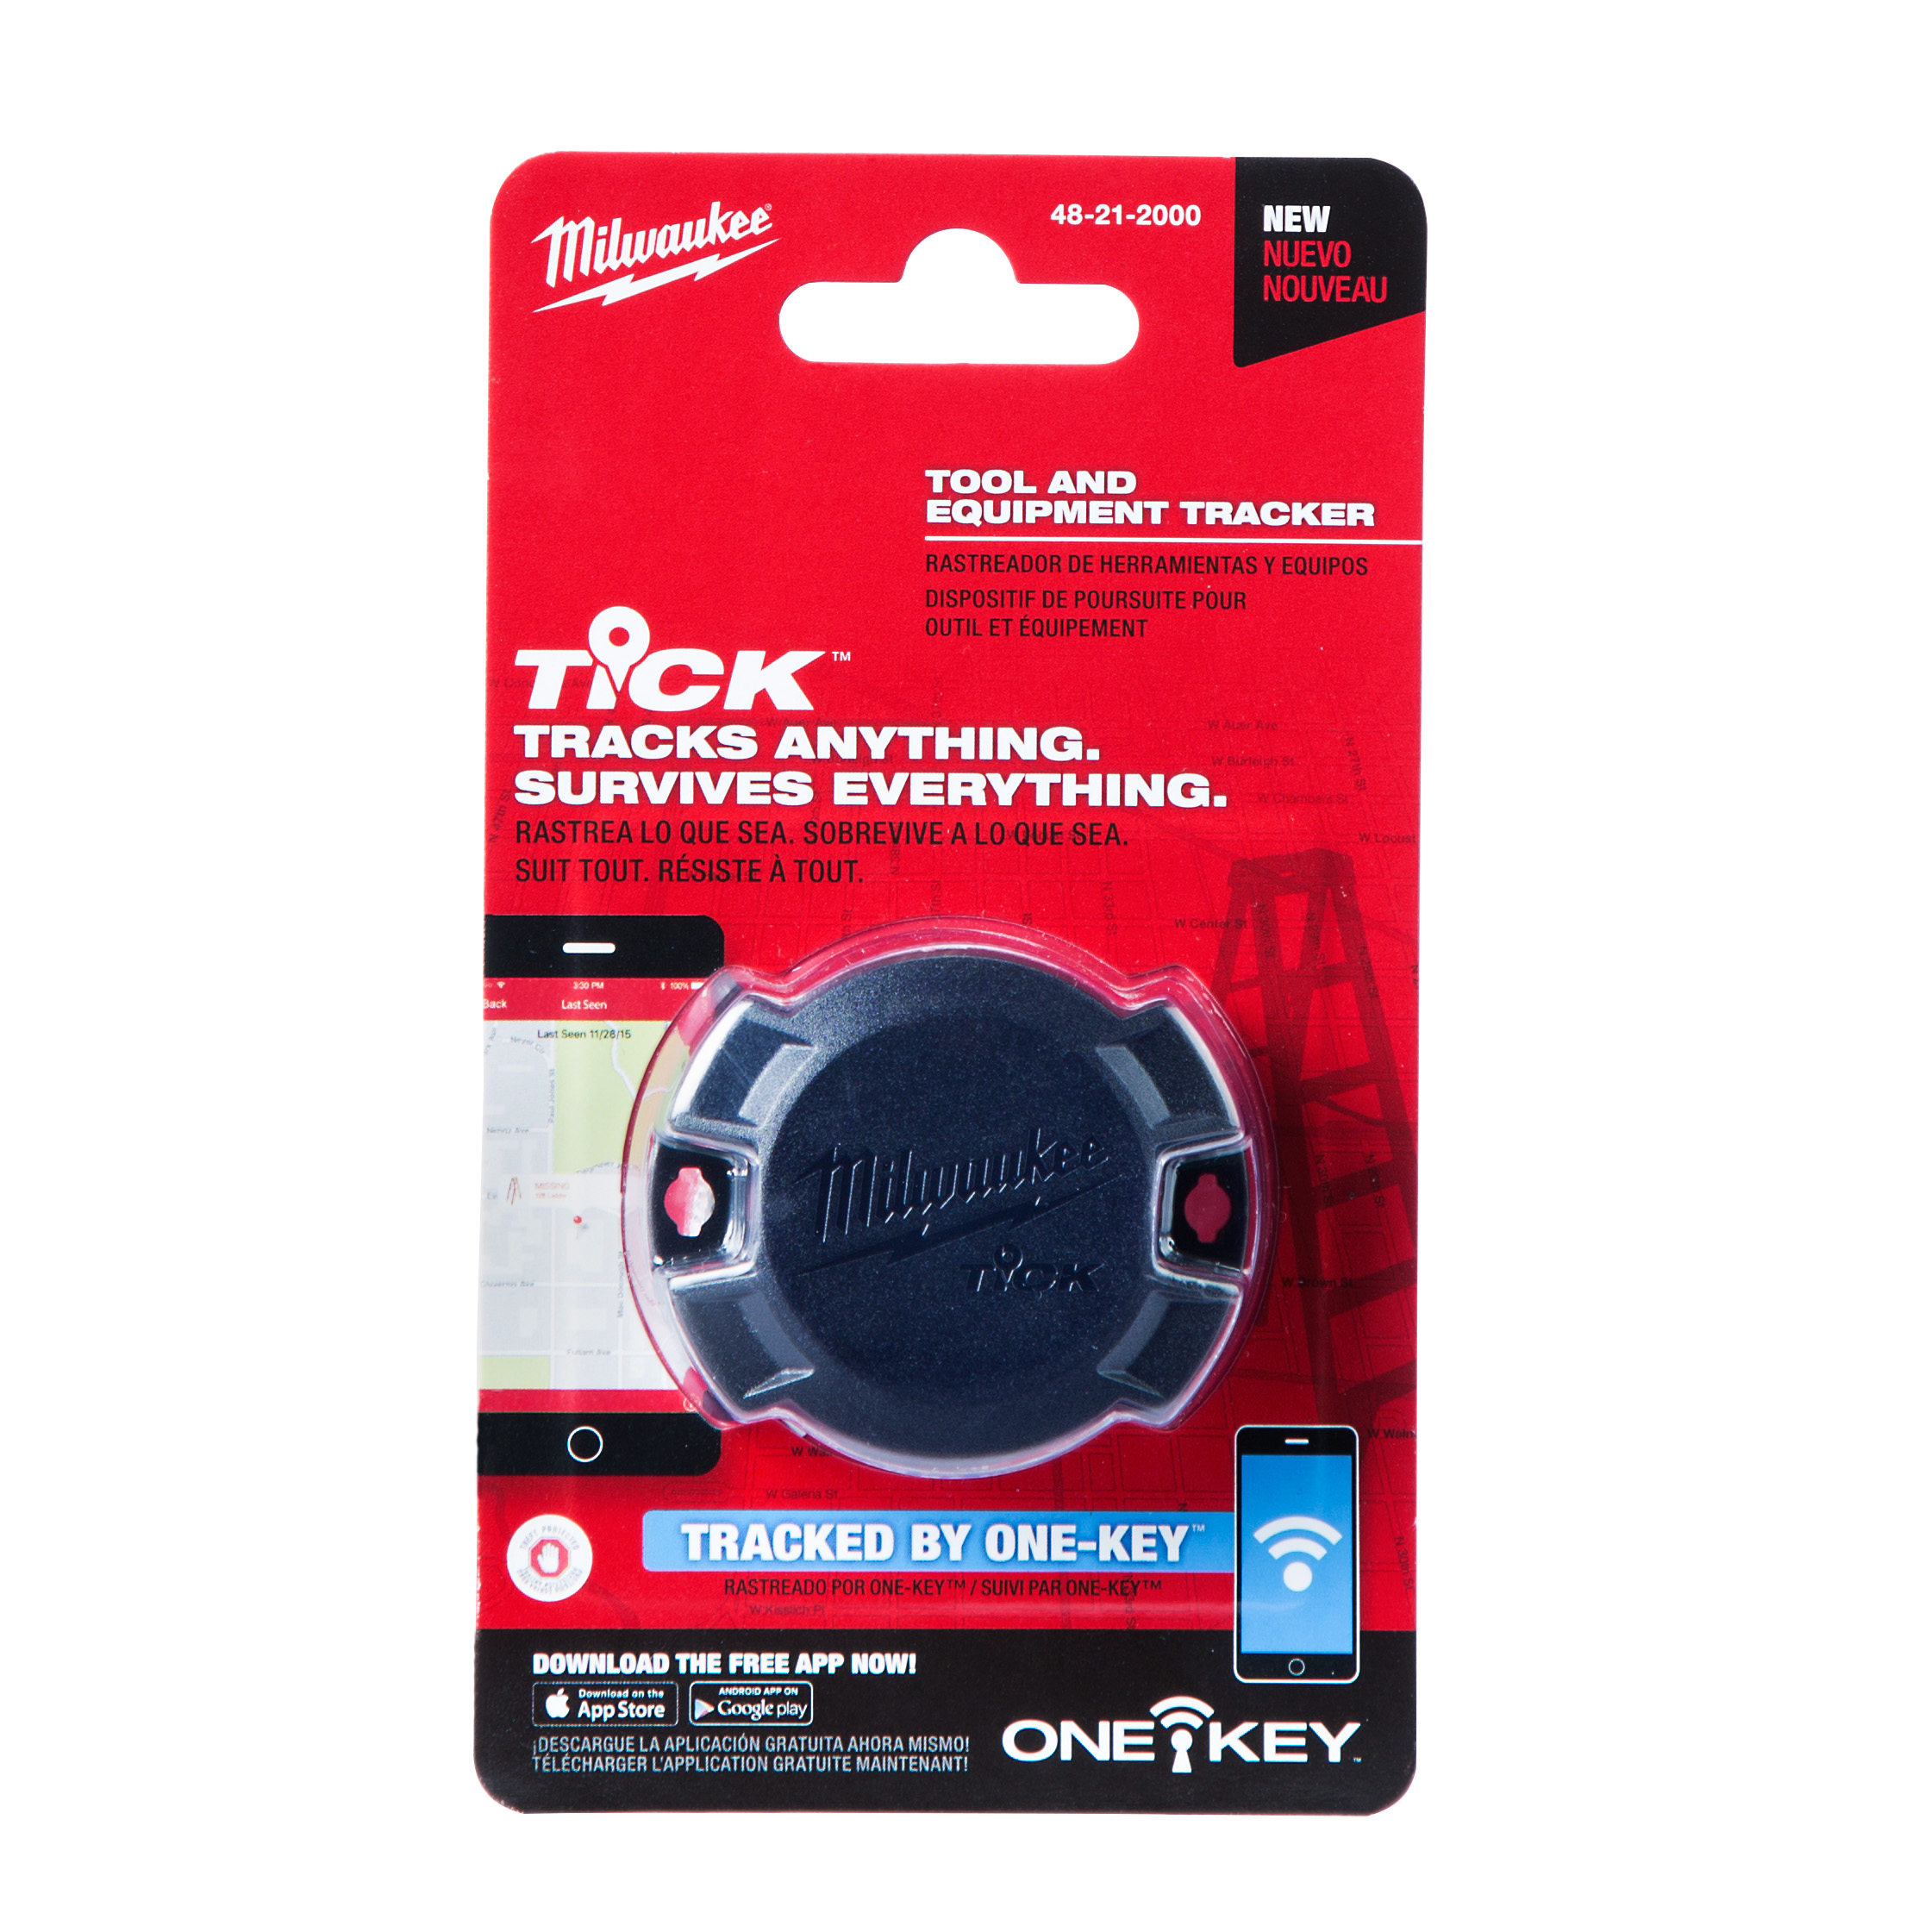 48-21-2000 045242493821 The Milwaukee® Tick™ tool and equipment tracker is the most versatile Bluetooth® tracker on the market. With multiple attachment options and a low profile design, users can glue, screw, rivet or strap the Tick™ on anything. Weather, water and dust proof ratings ensure that the Tick™ tool and equipment tracker will survive every environment. Powered by a coin cell battery that provides over 1 year of runtime, the Tick™ will reliably provide tracking beacons anytime, anywhere. Receive low battery, service reminders and missing tool notifications through the ONE-KEY™ app. Location services powered by the ONE-KEY™ app.